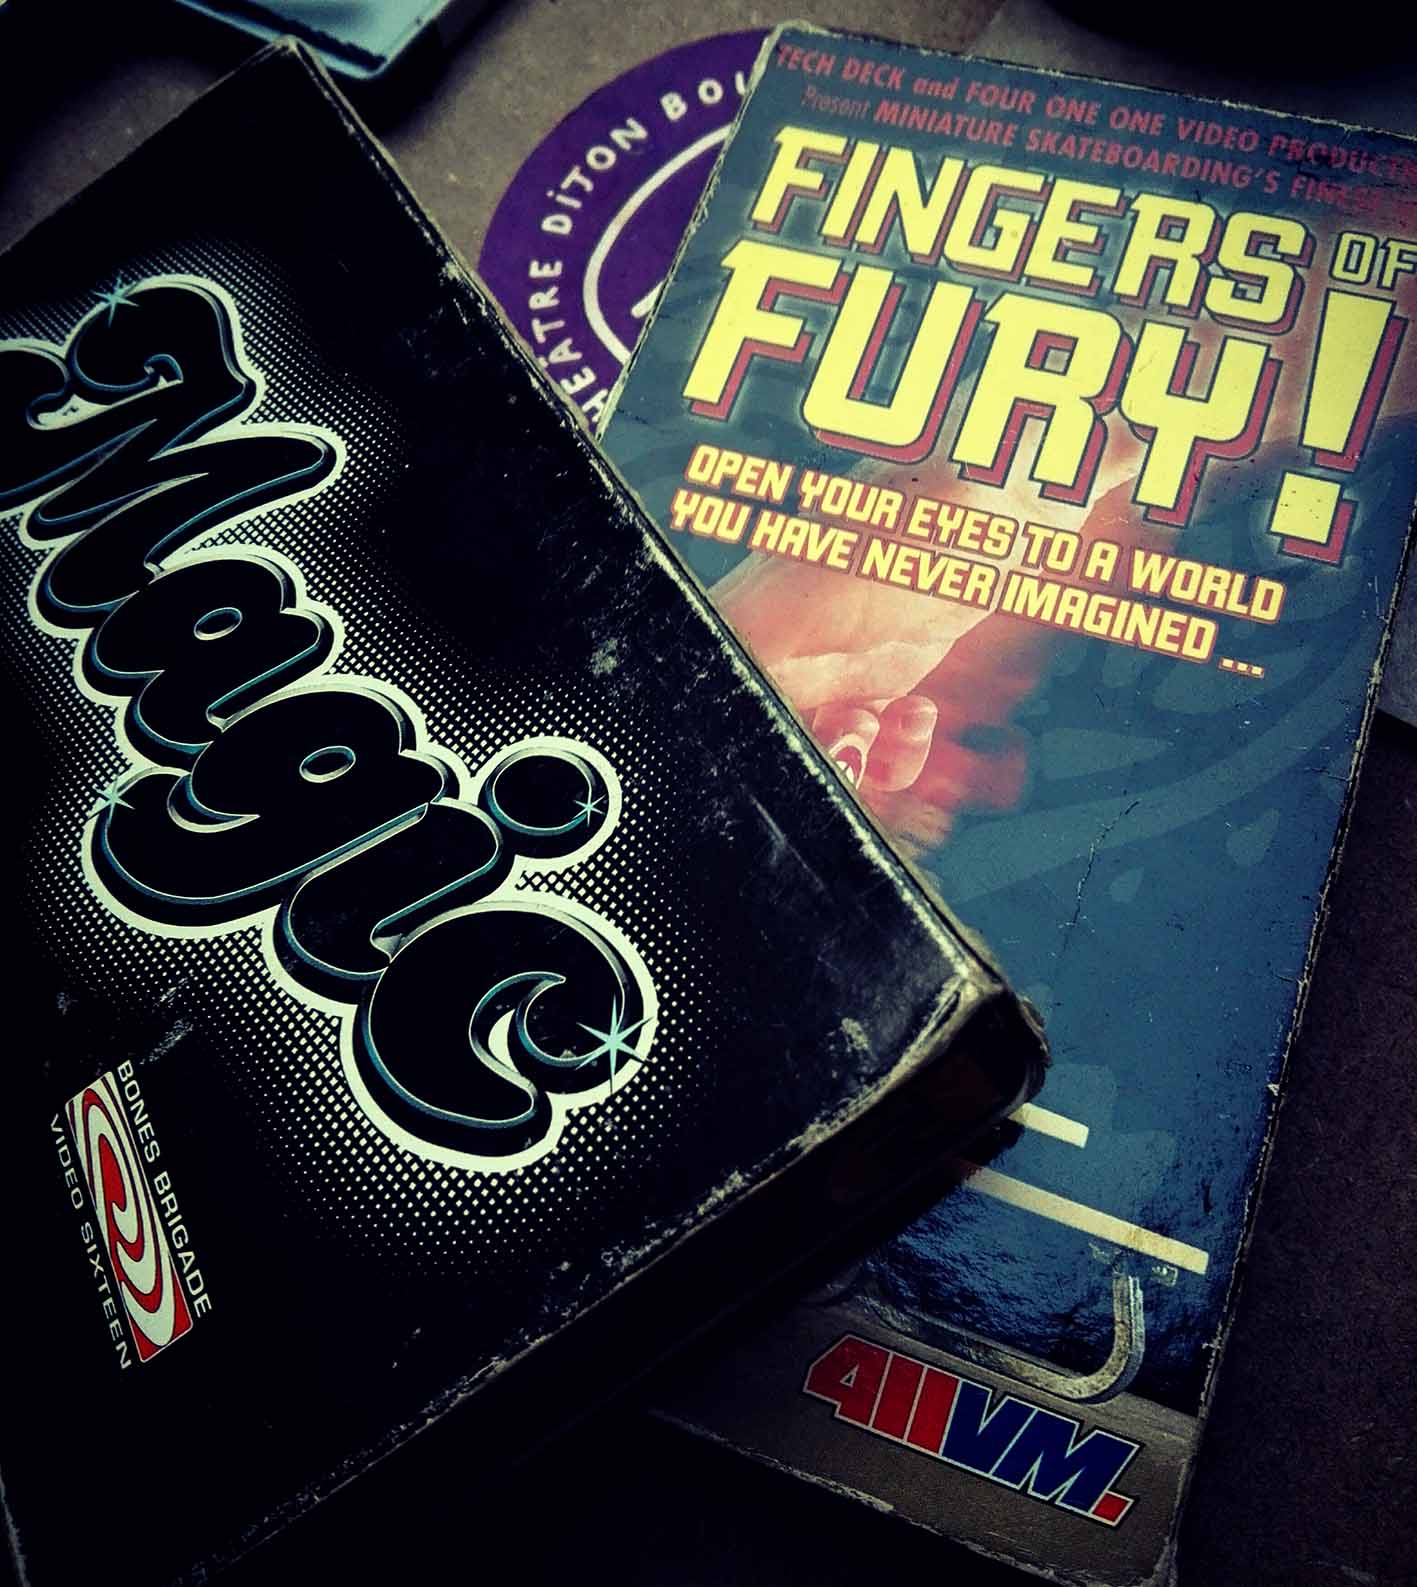 fingers of fury tape and magic tape